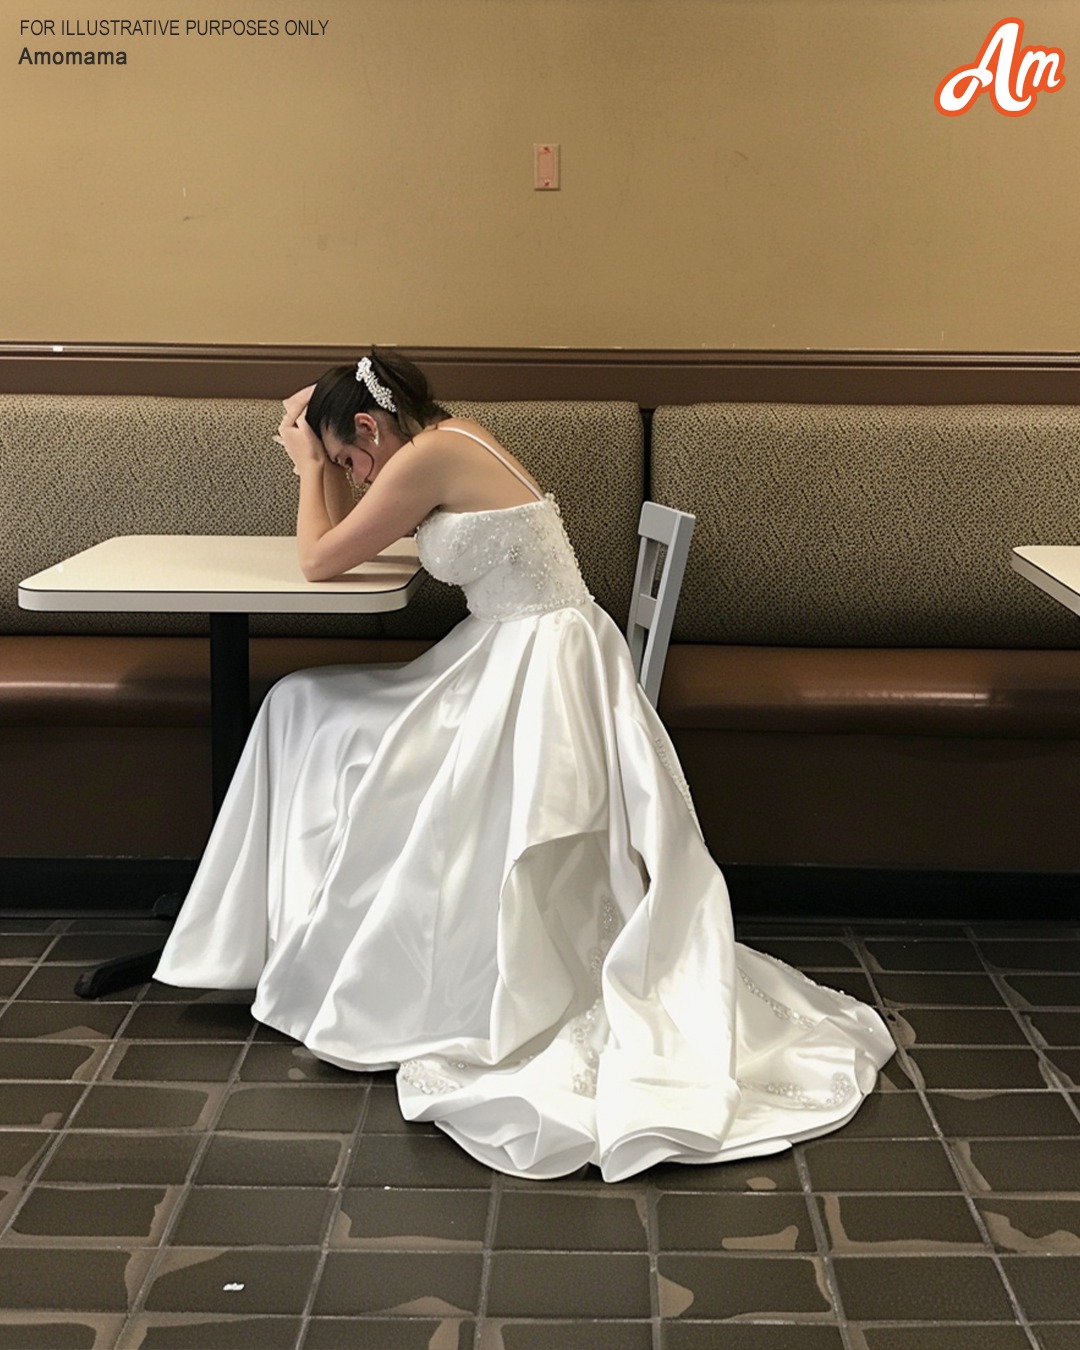 I SAW MY HIGH SCHOOL SWEETHEART CRYING IN A DINER IN A WEDDING DRESS – WHEN SHE TOLD ME WHAT HAPPENED, I PROPOSED A PLAN